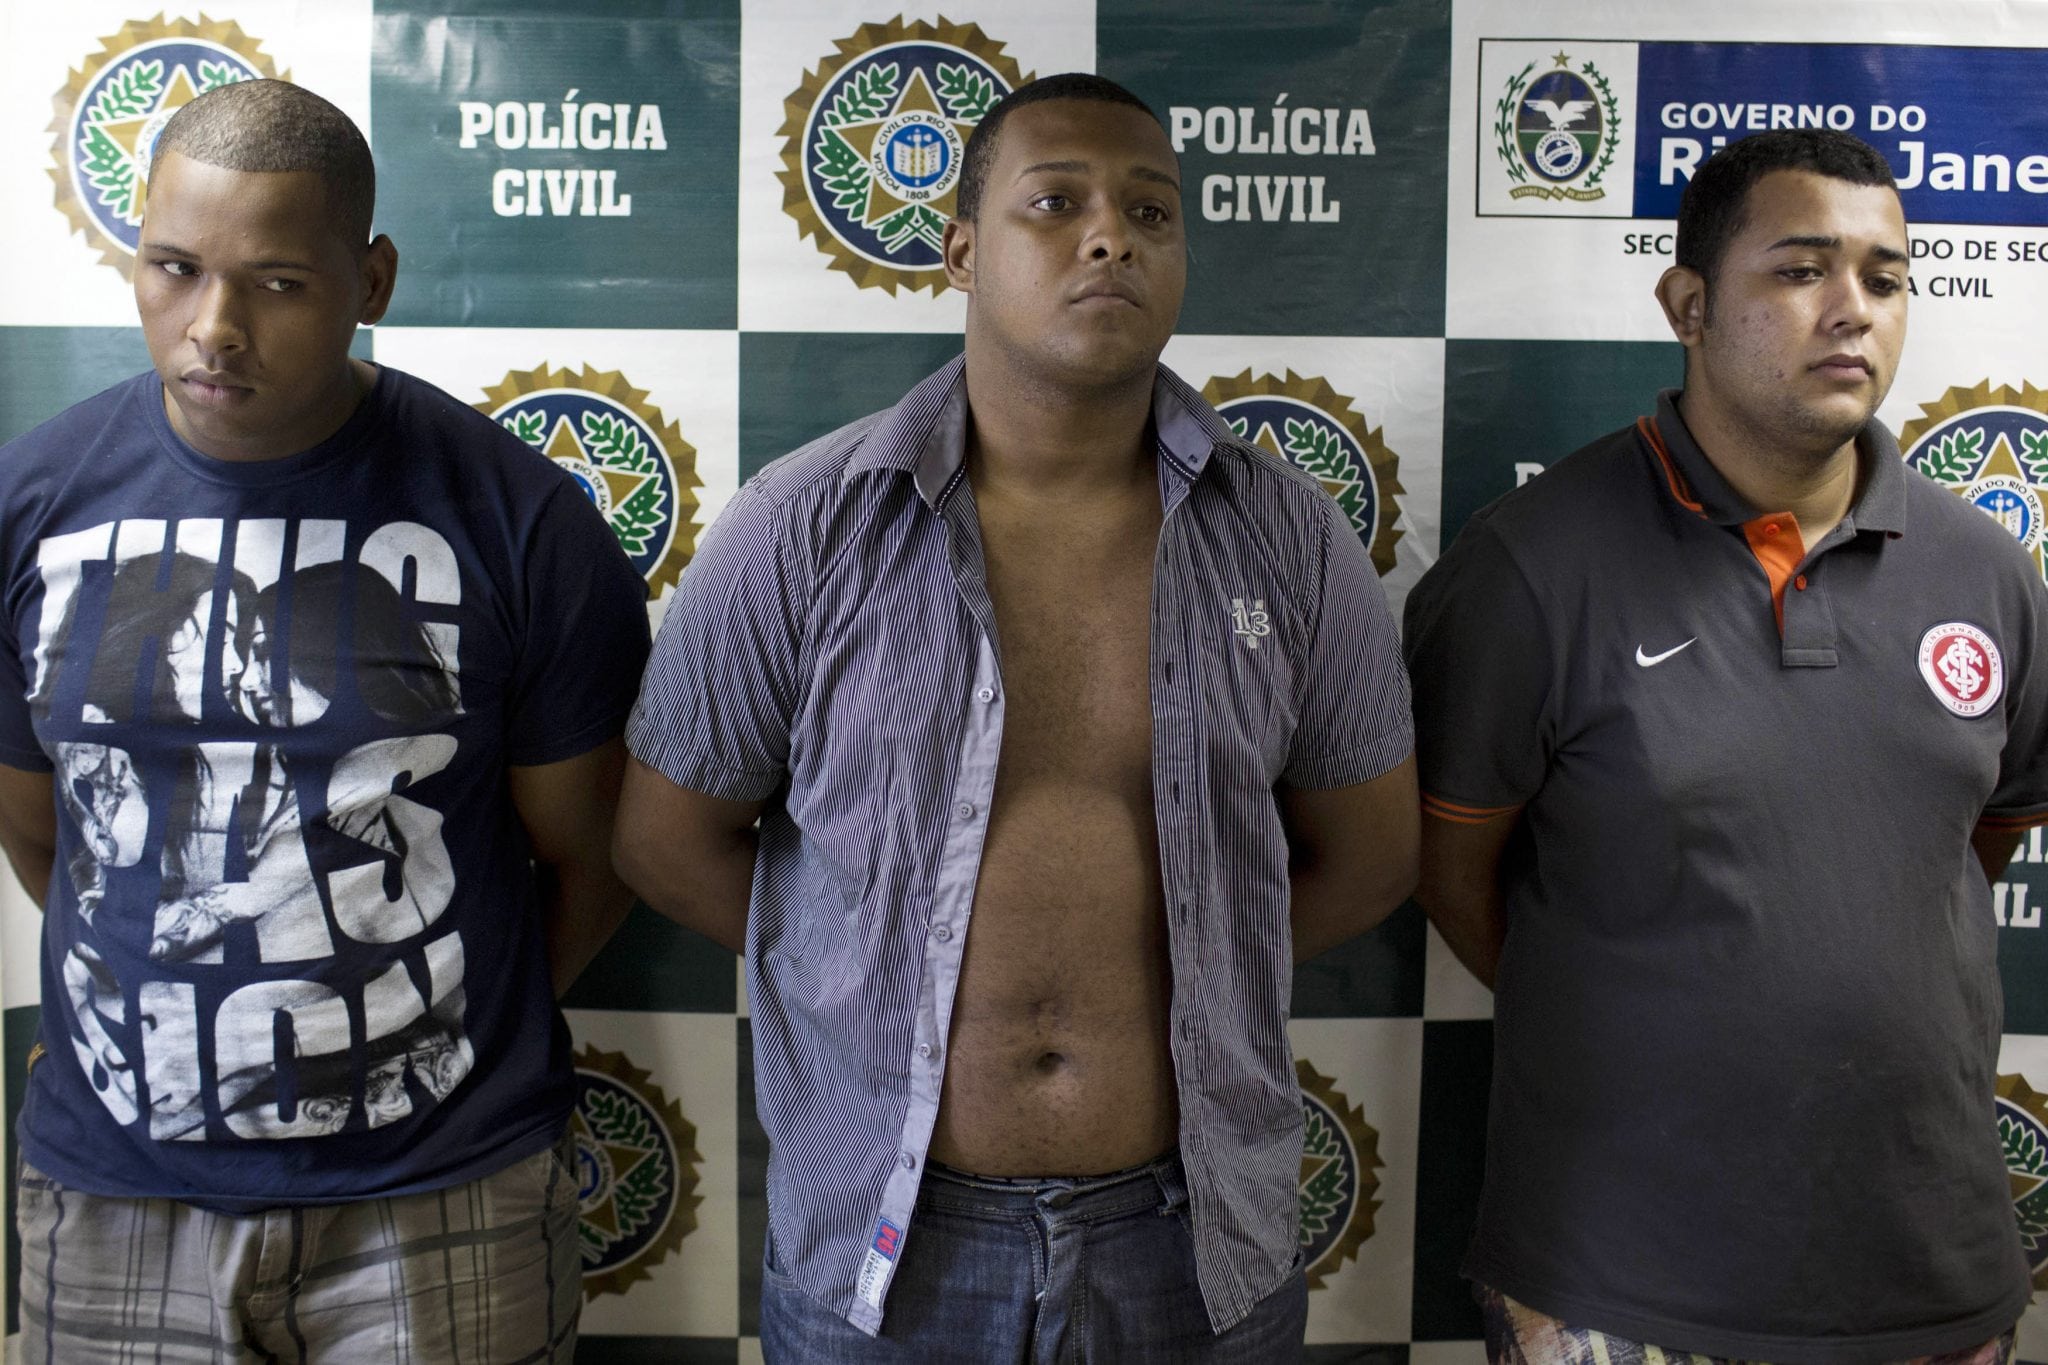 Suspects are presented to the press at the Special Police Unit for Tourism Support (DEAT) after being arrested for allegedly attacking tourists in Rio. 